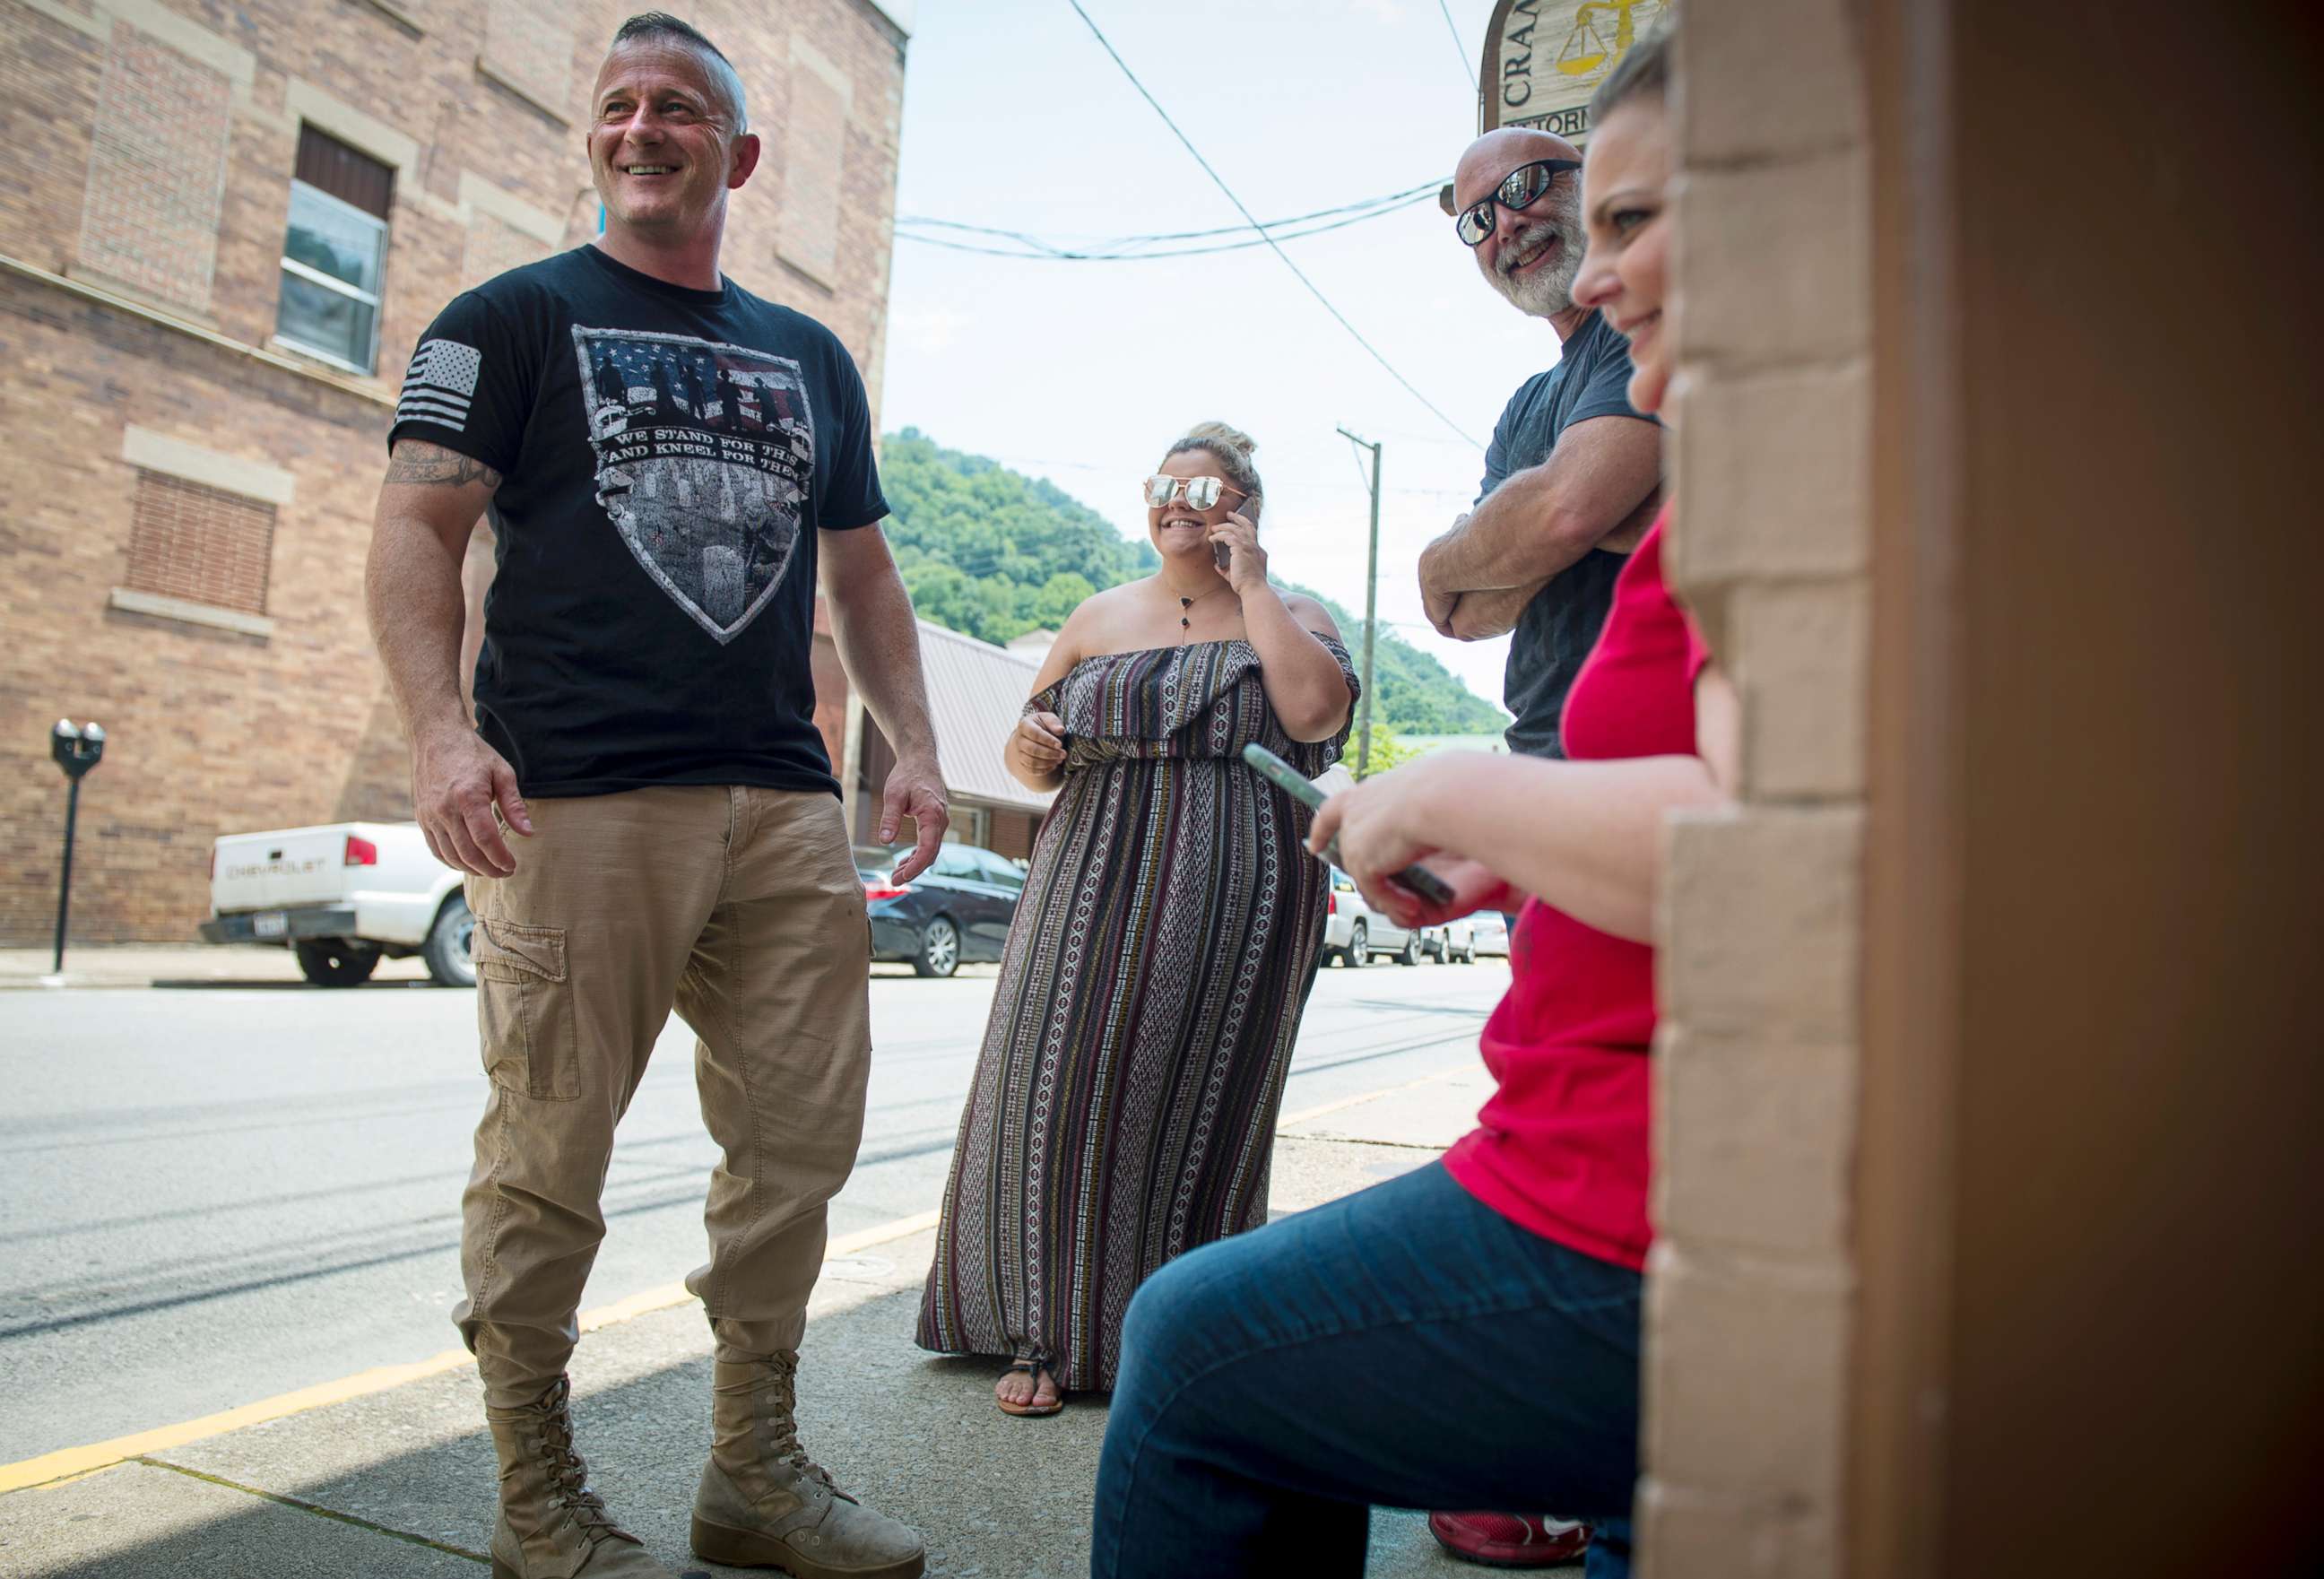 PHOTO: Richard Ojeda, left, stands outside his campaign headquarters in Logan, West Virginia alongside his communications director Madalin Sammons, center, and campaign volunteer Heather Ritter, right, July 5, 2018.